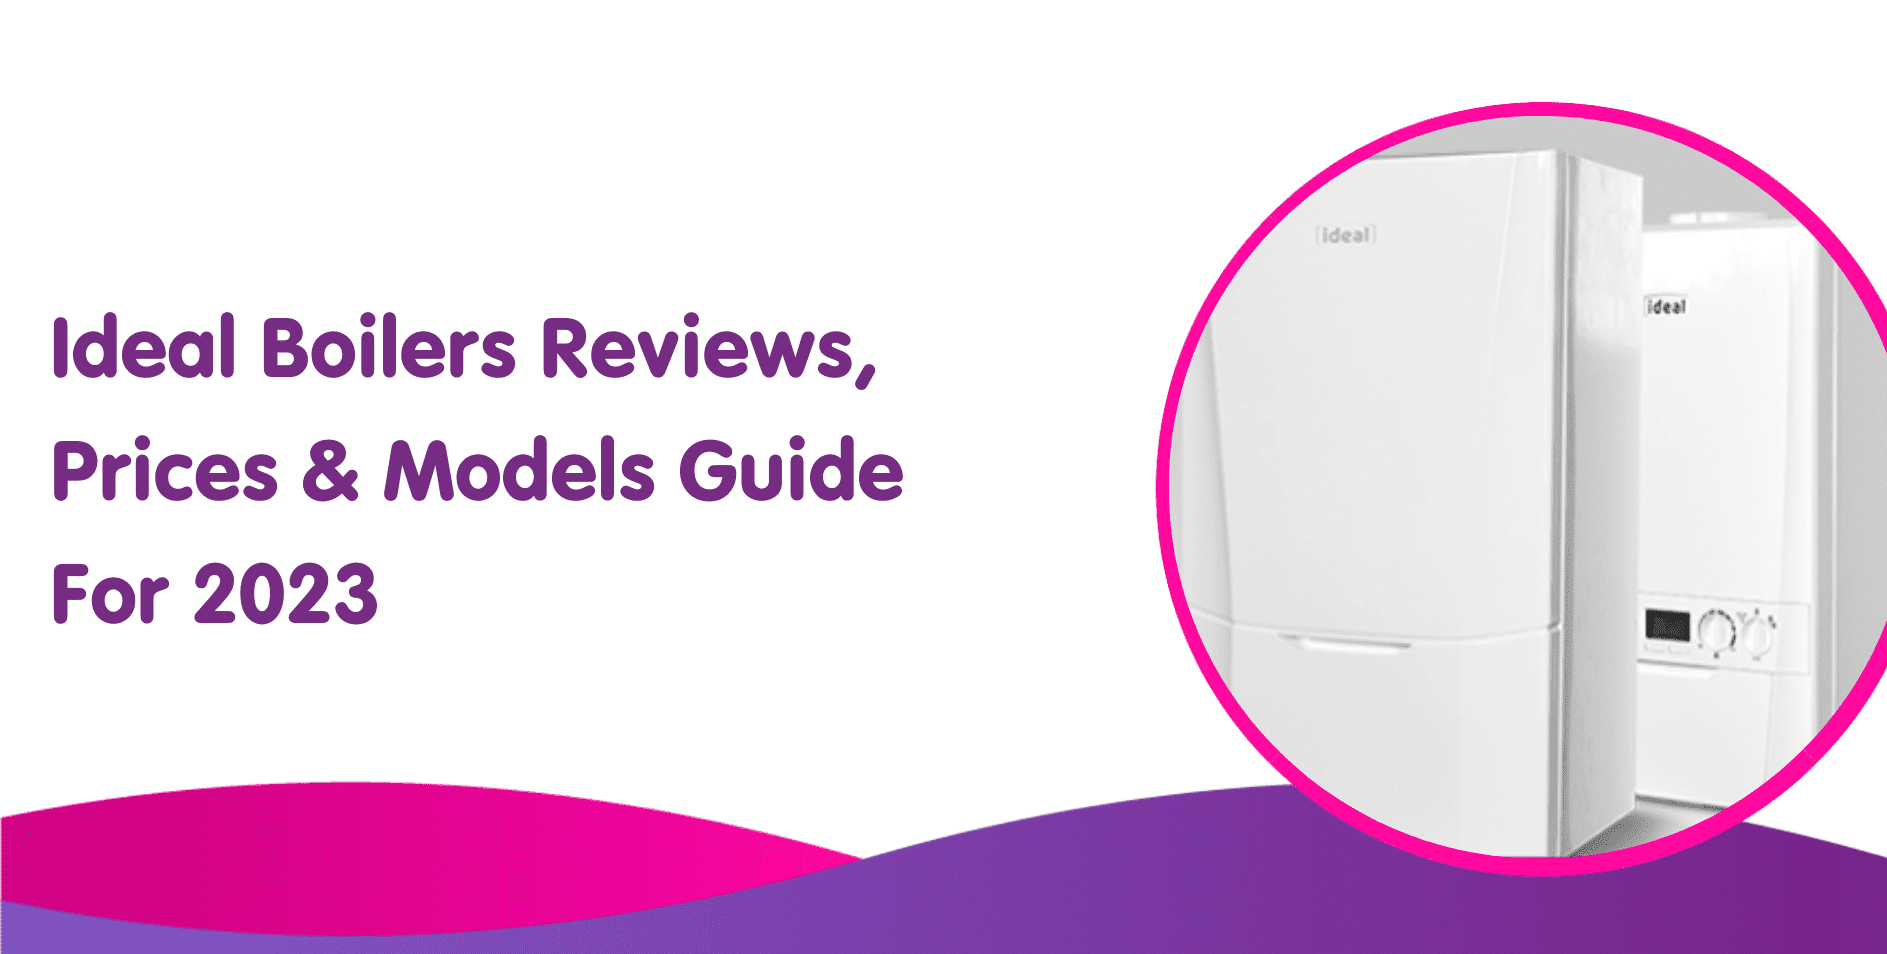 Ideal Boilers Reviews, Prices & Models Guide For 2023